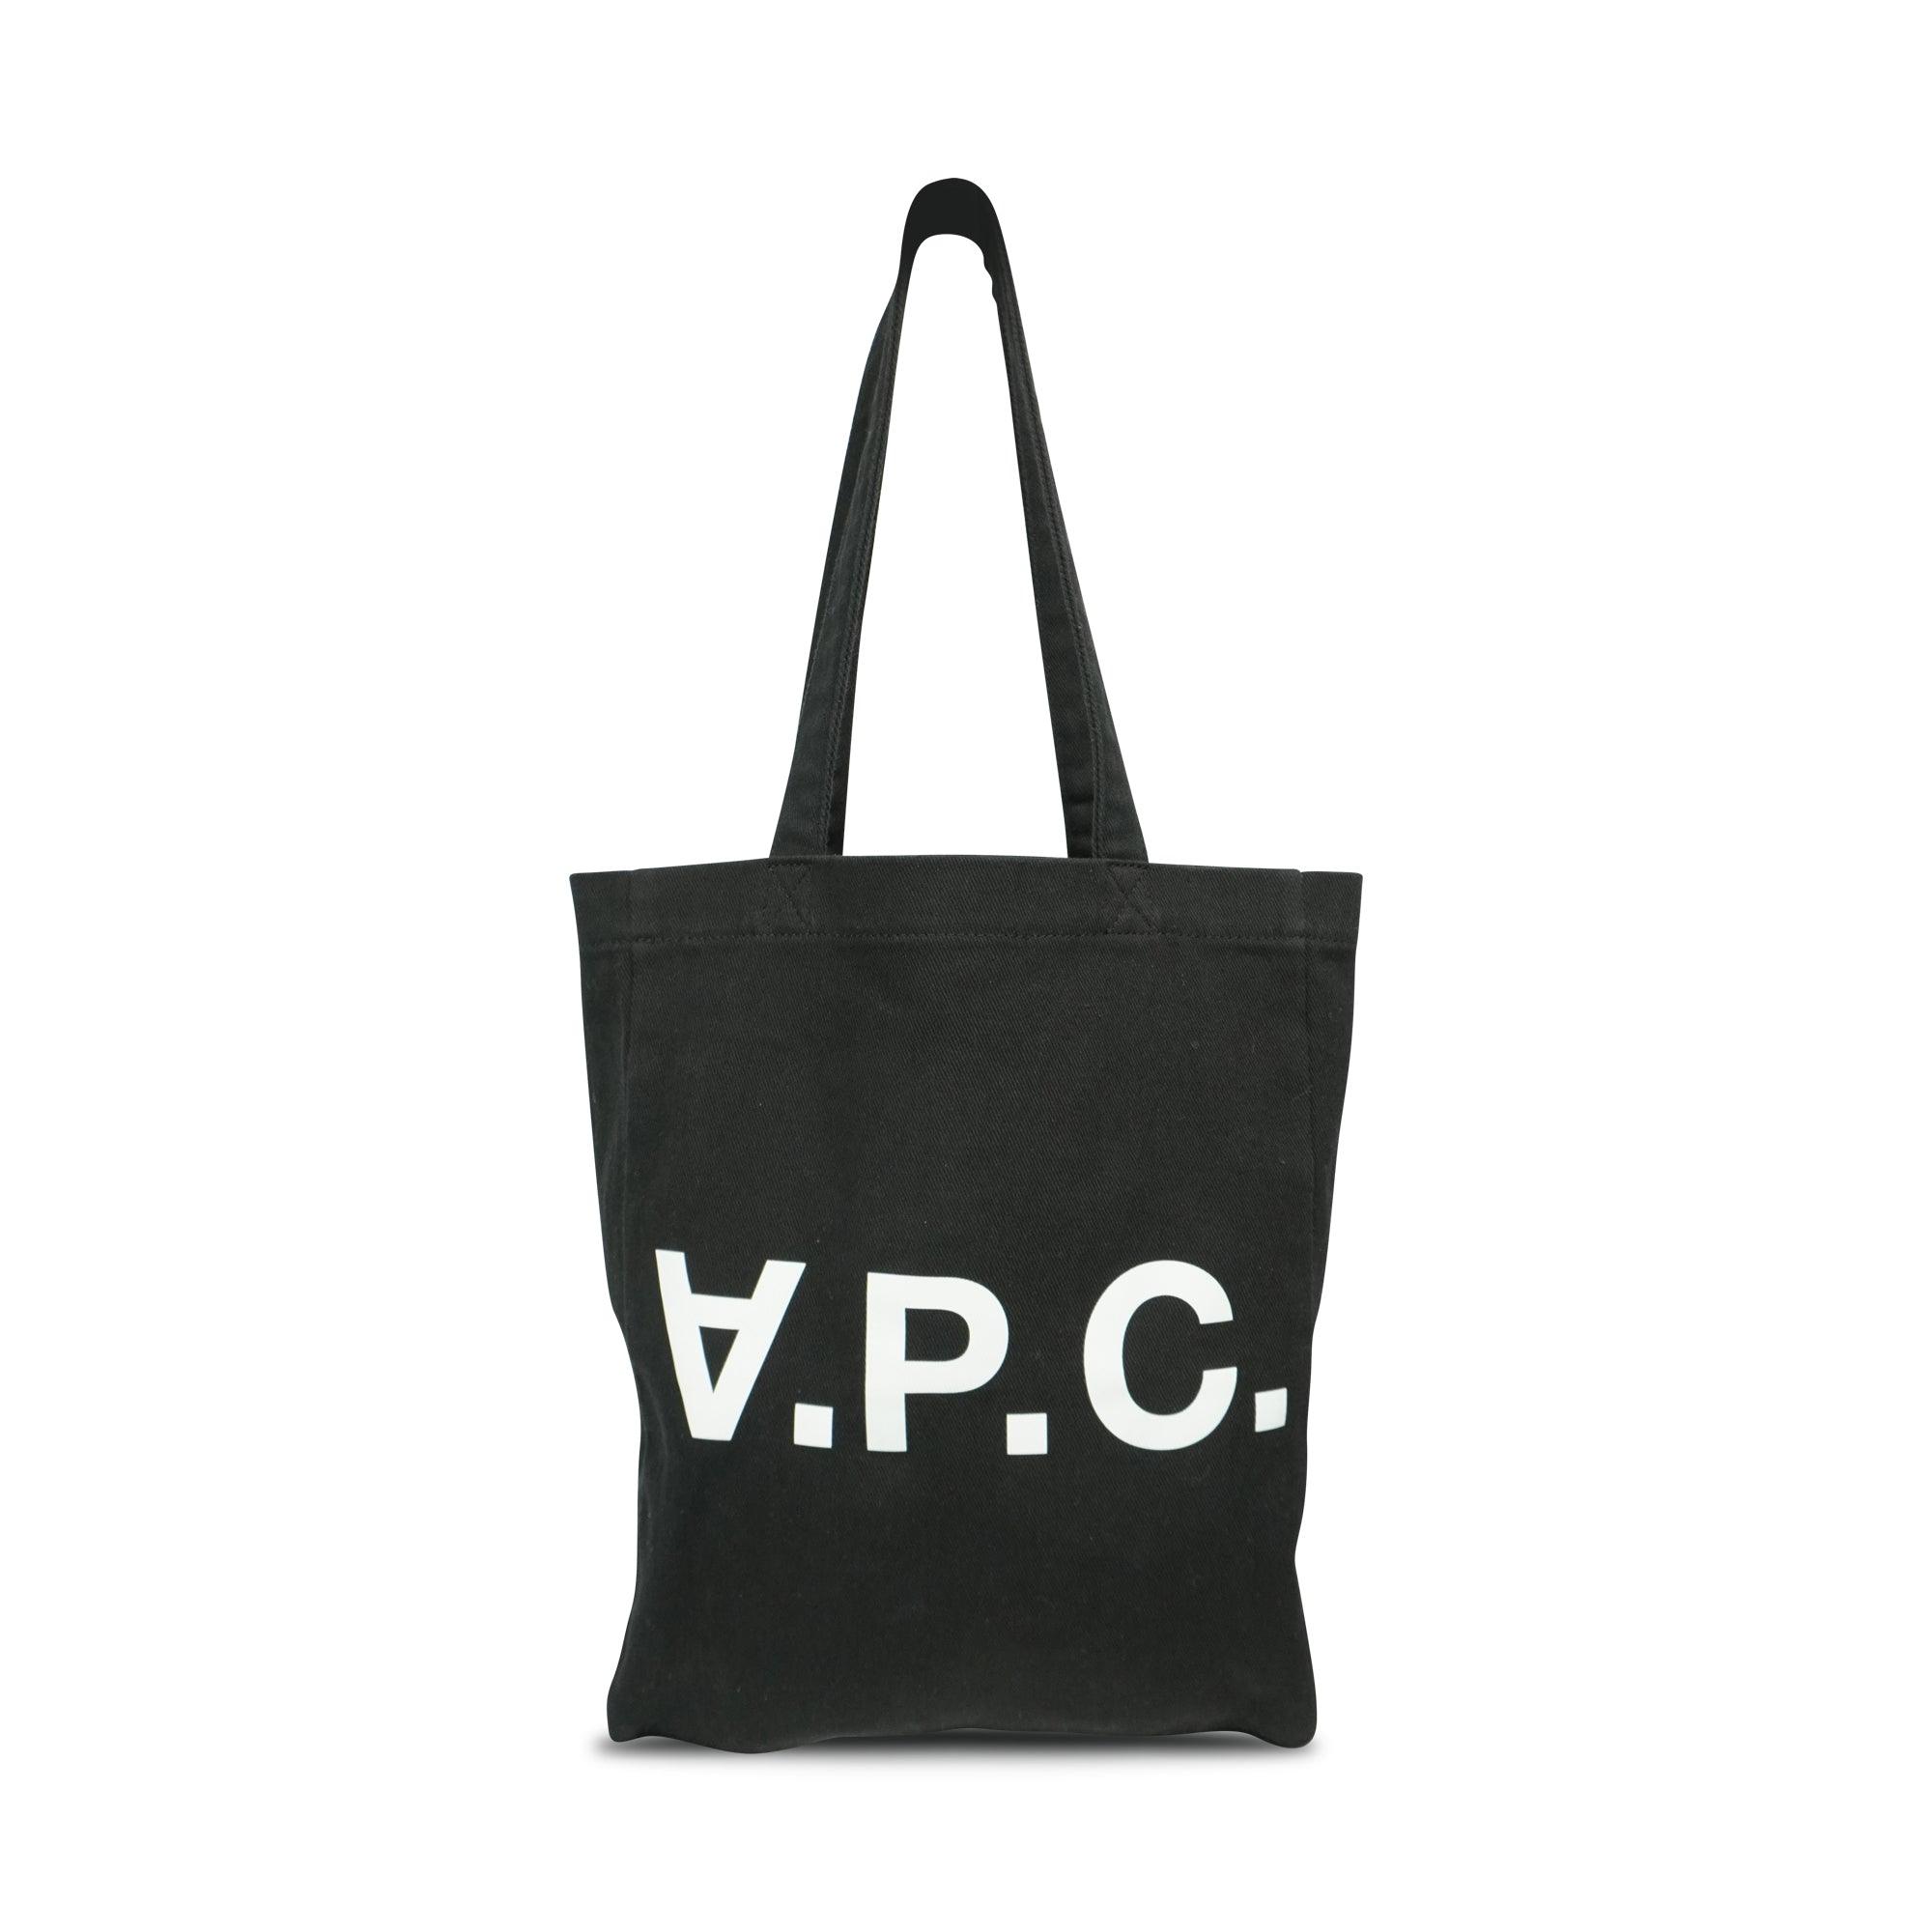 APC Tote Bag - Fashionably Yours